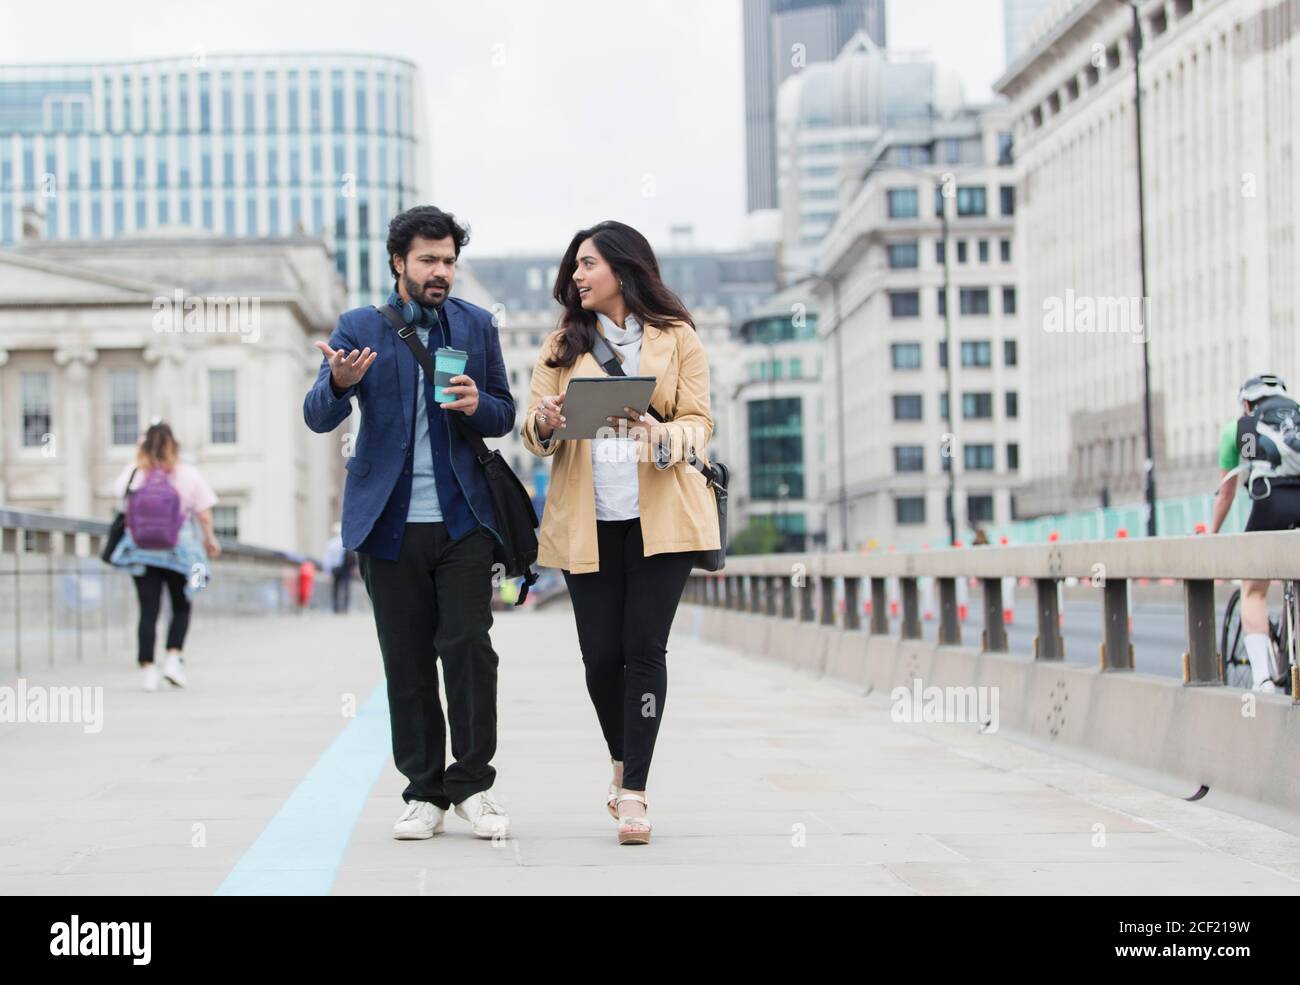 Business people with coffee and digital tablet talking on city bridge Stock Photo